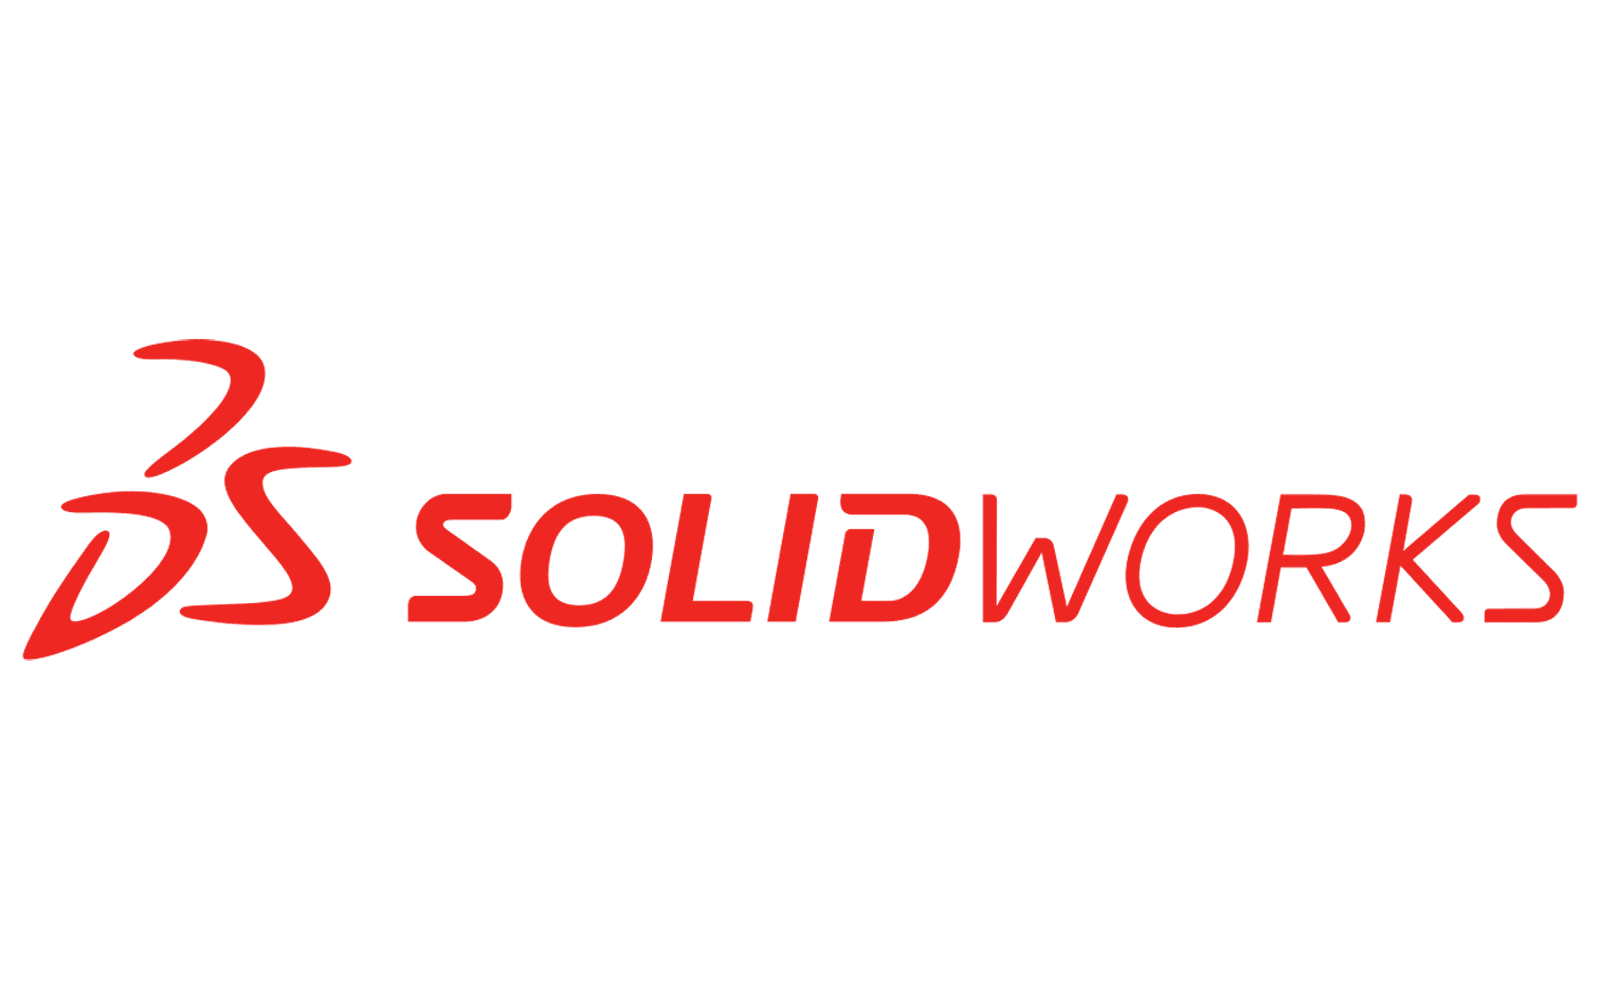 SolidWorks is a powerful 3D CAD software commonly used in mechanical engineering and product design. It provides comprehensive tools for designing complex assemblies, creating detailed part models, and performing simulations.